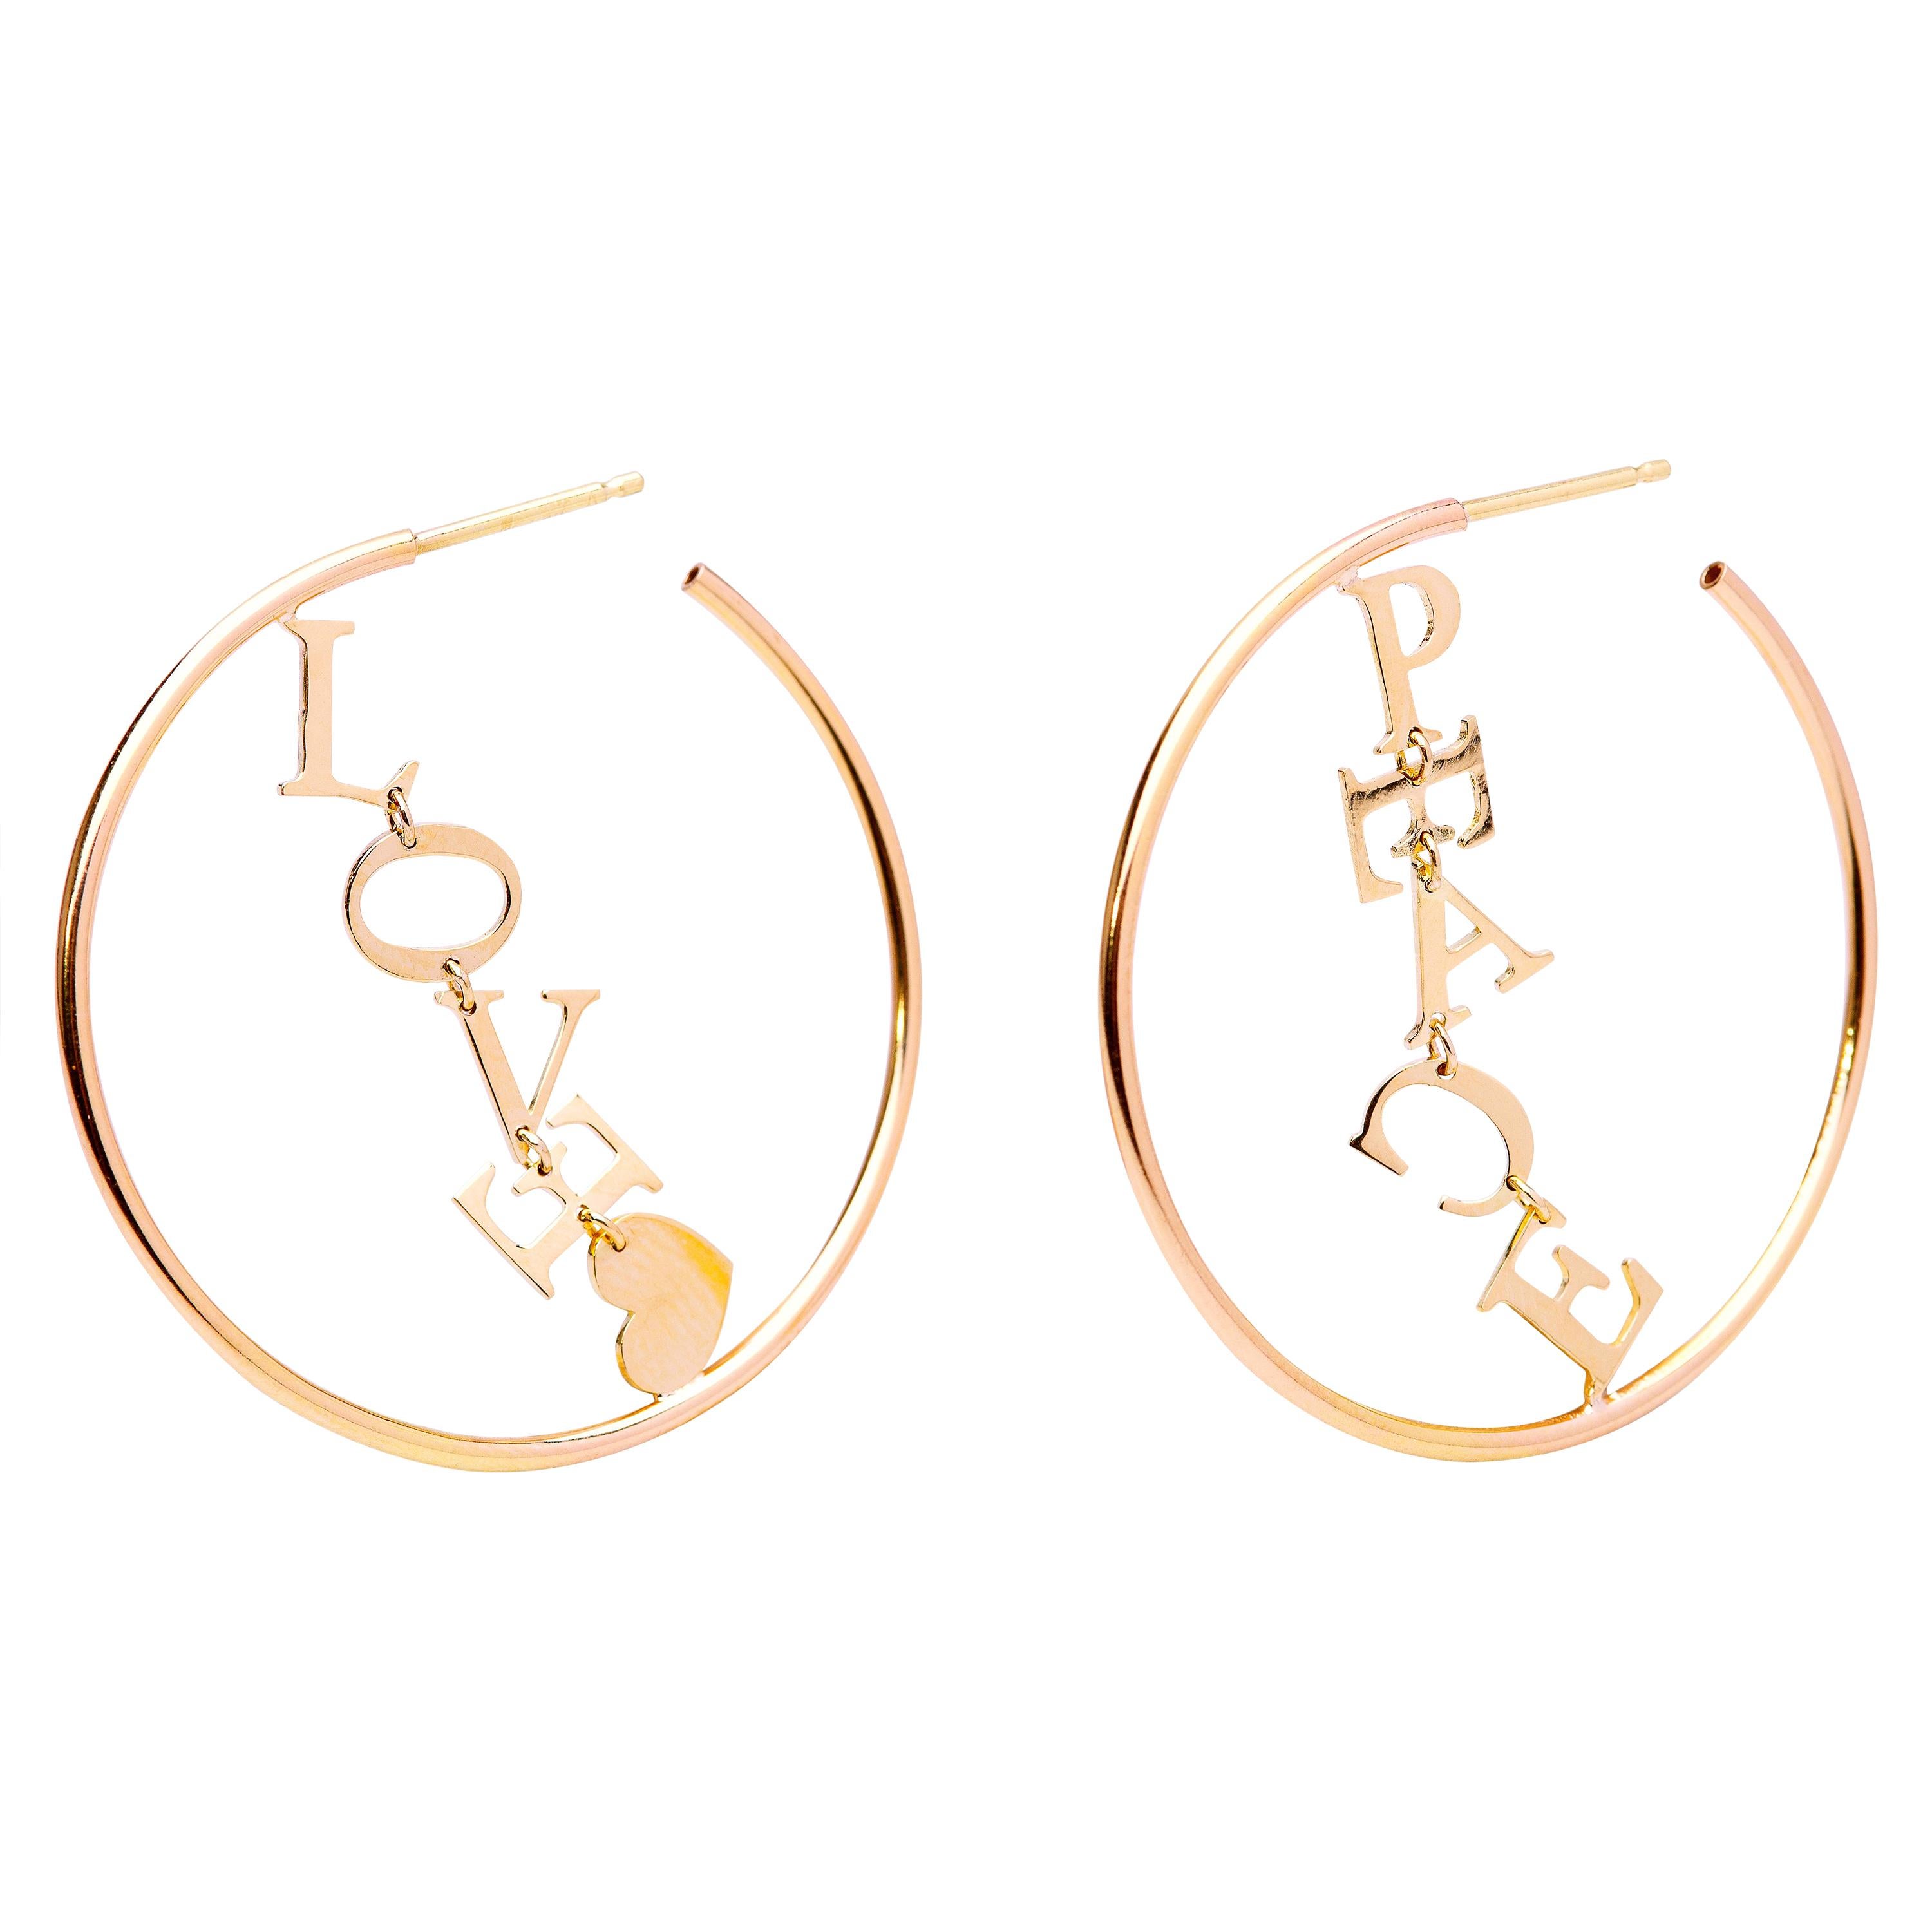 18 Karat Yellow Gold Hoops "Peace And Love" Modern Handcrafted Design Earrings